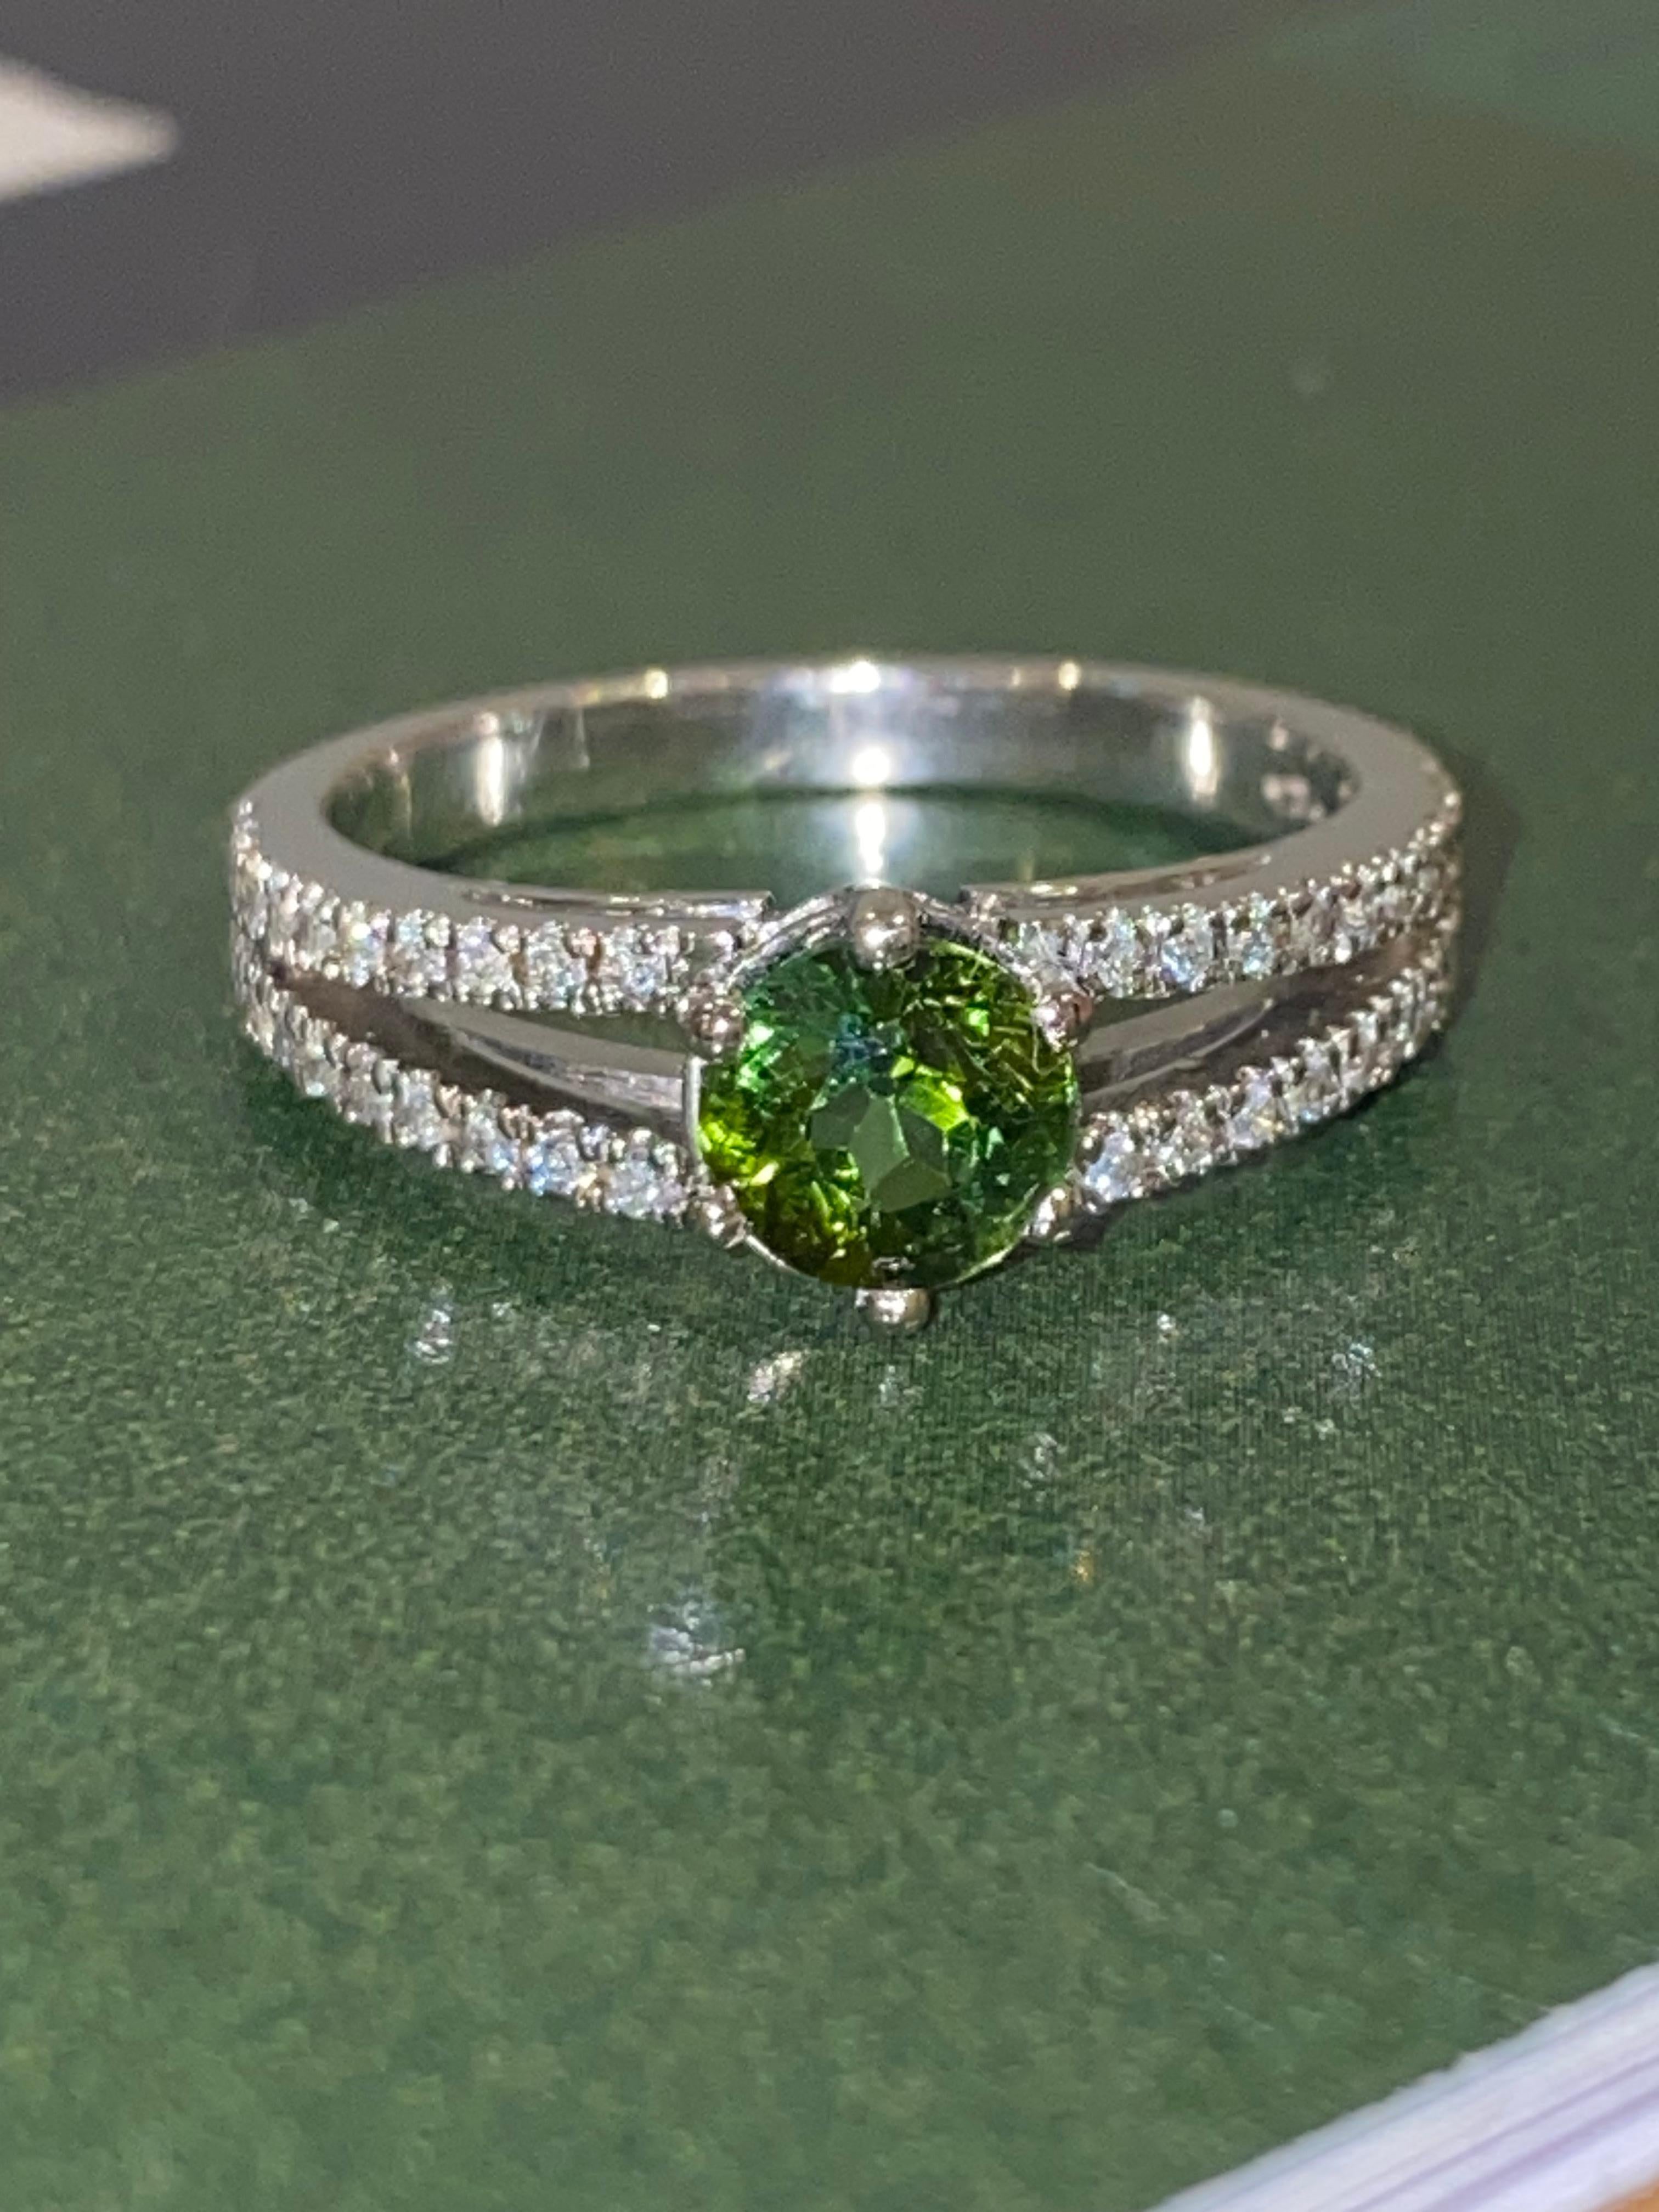 Of eternally popular solitaire with accents design,

this piece is crafted with refined elegance

in 18K White Gold

 

Centring a magnificent Round Natural Verdelite Tourmaline

of 1.20ct,

of intense vivid green colour & excellent clarity



One